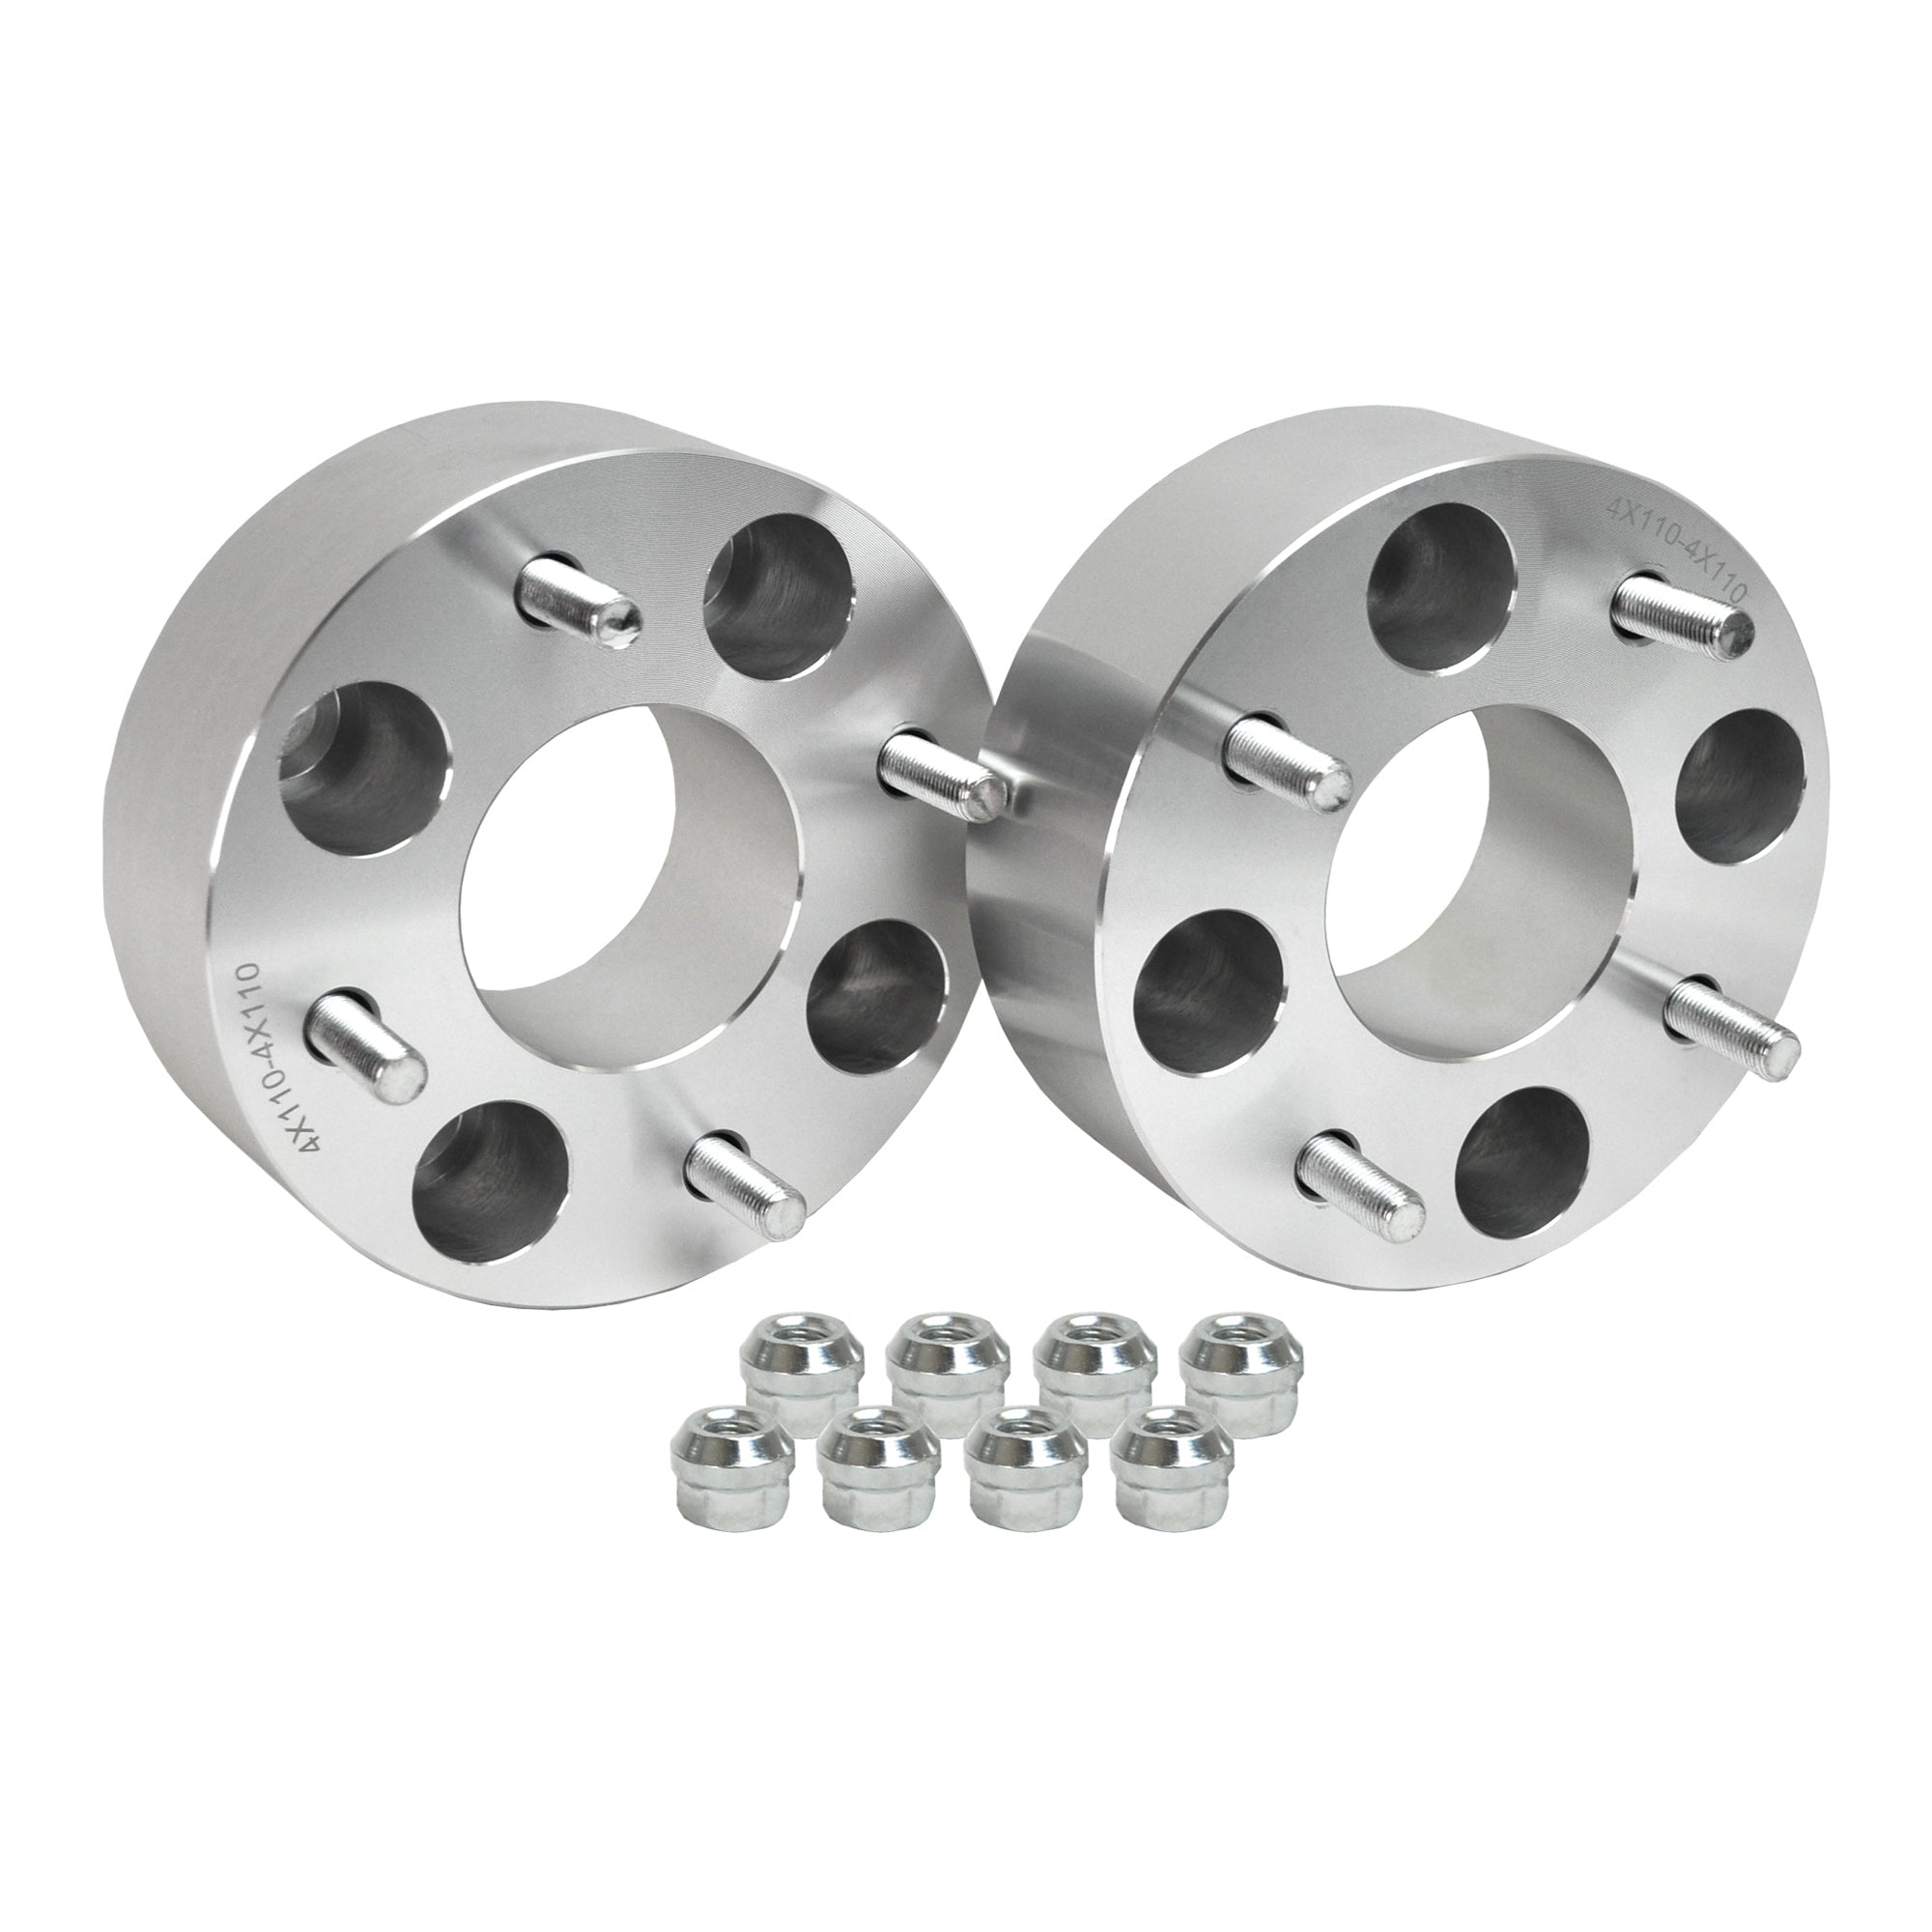 Wheel Spacer for Yamaha Breeze125 